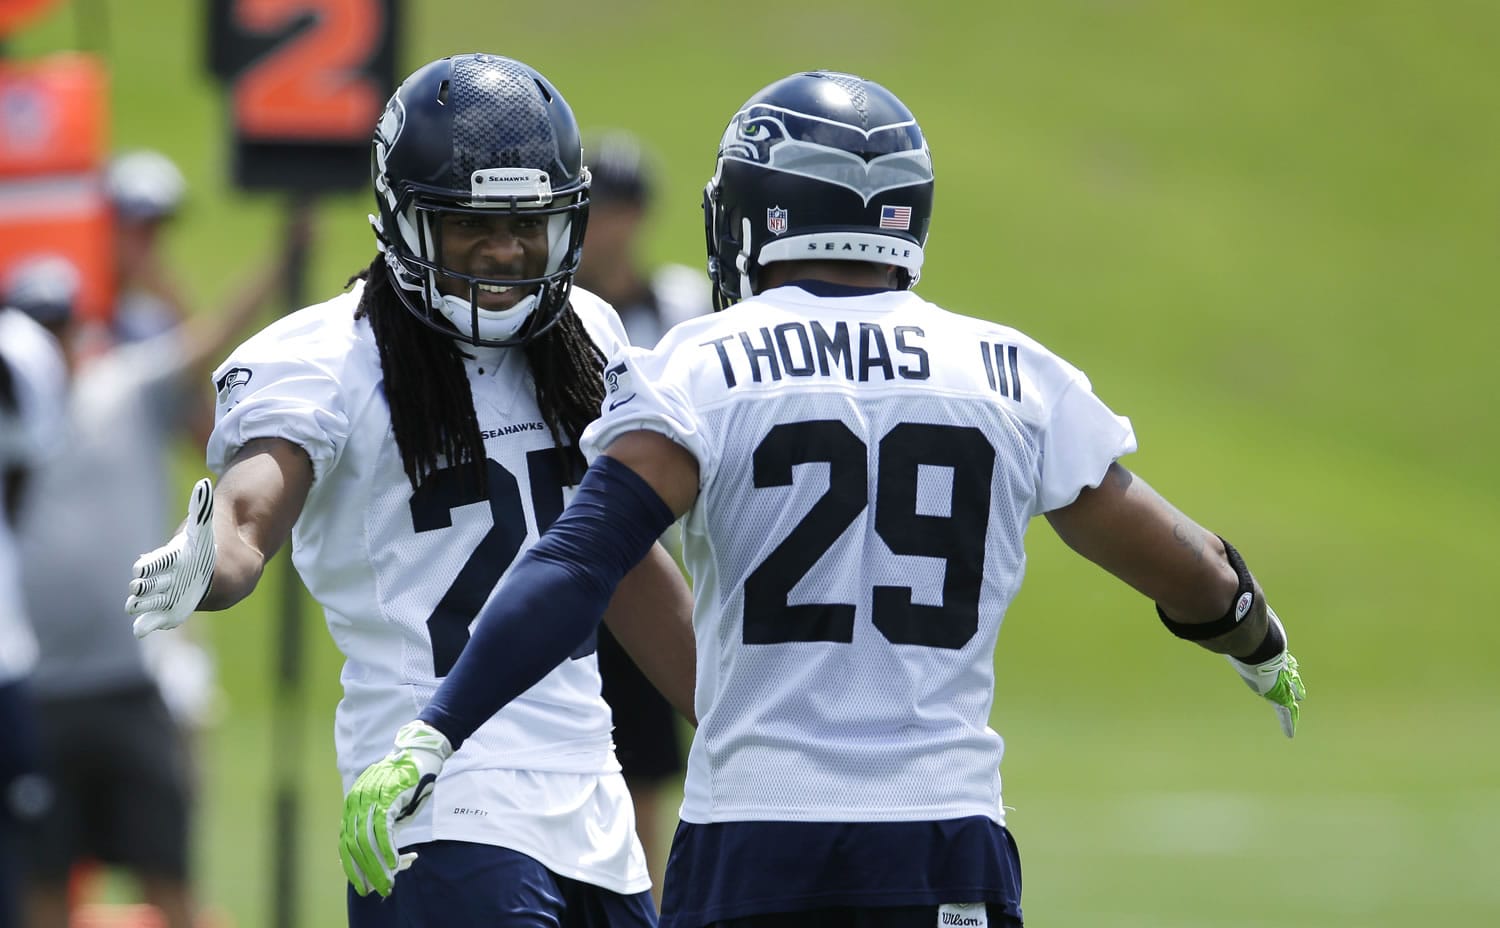 Seattle Seahawks cornerback Richard Sherman, left, reacts to a play with free safety Earl Thomas, right, during a practice drill at an NFL football organized team activity, Monday, June 9, 2014 in Renton, Wash. (AP Photo/Ted S.